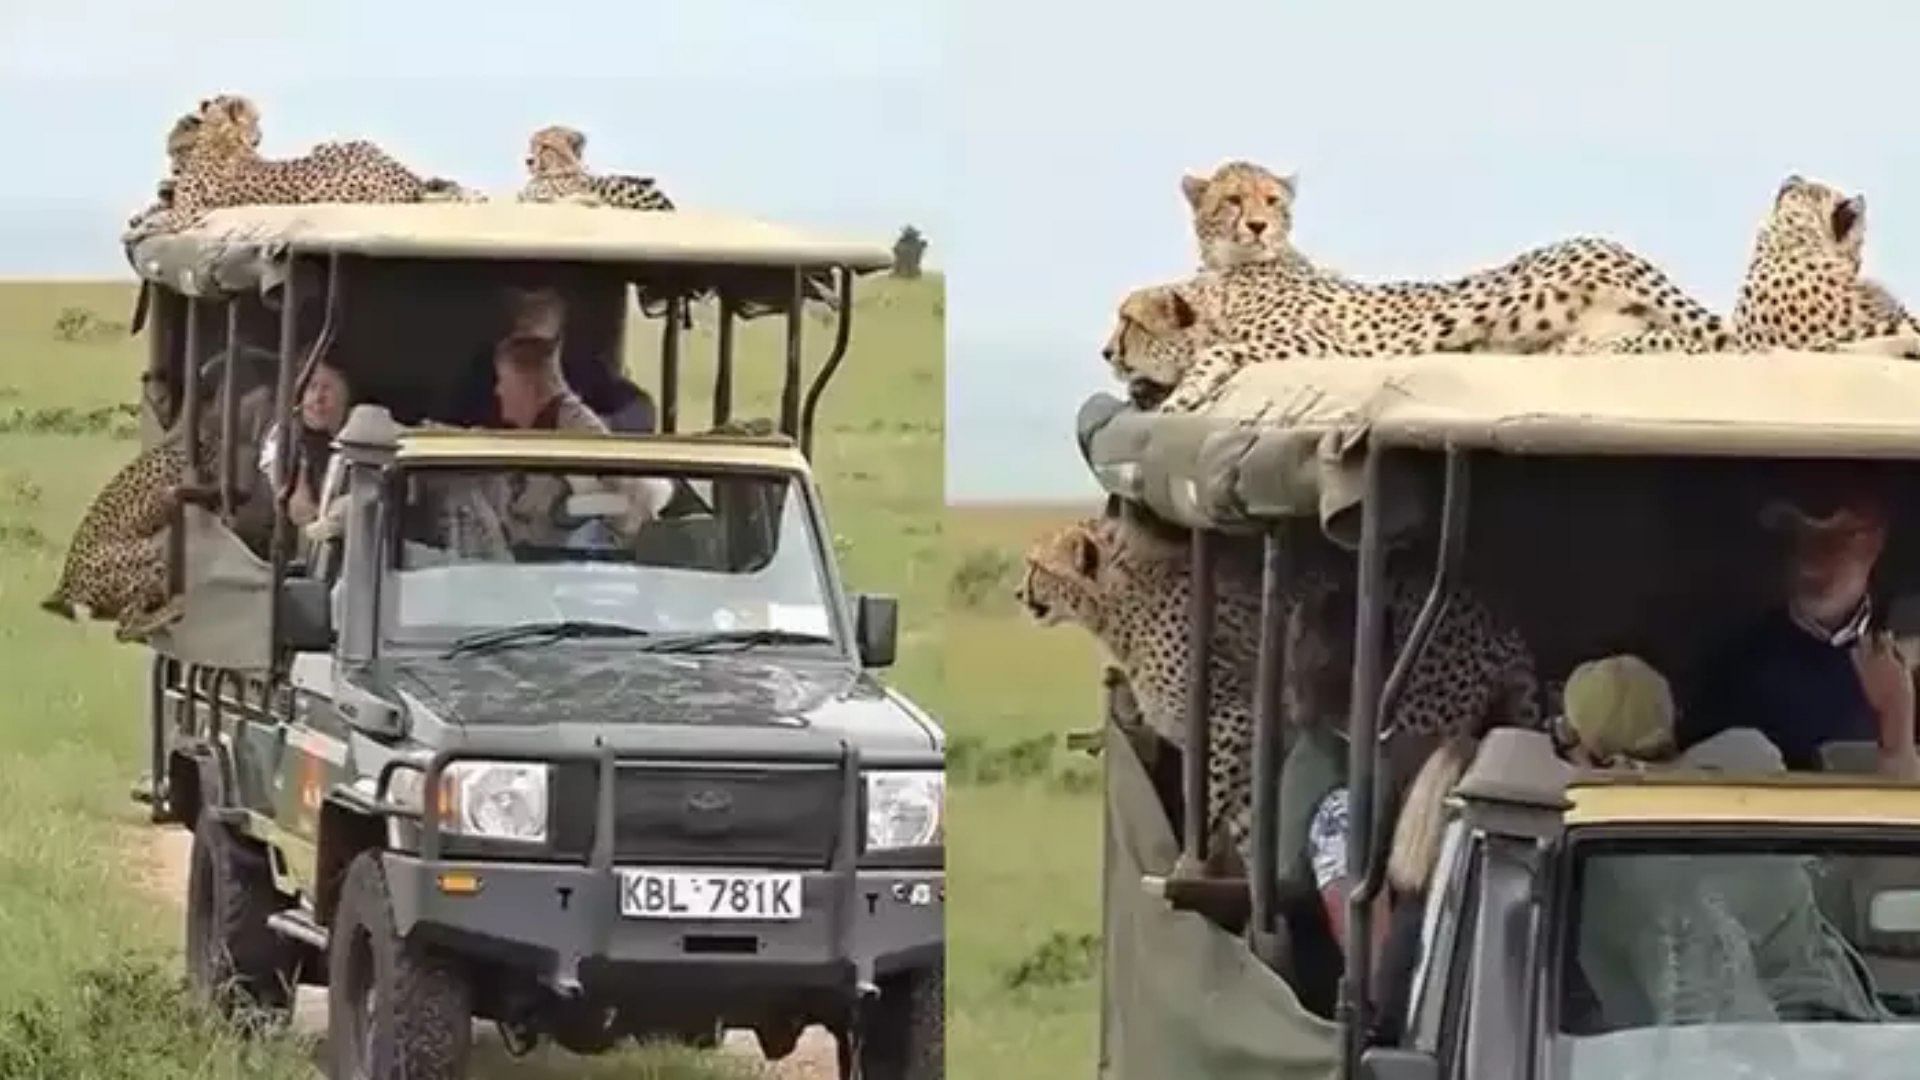 jungle safari video of cheetah Seen Climbing And Playing On Open Jeep Watch Viral Video